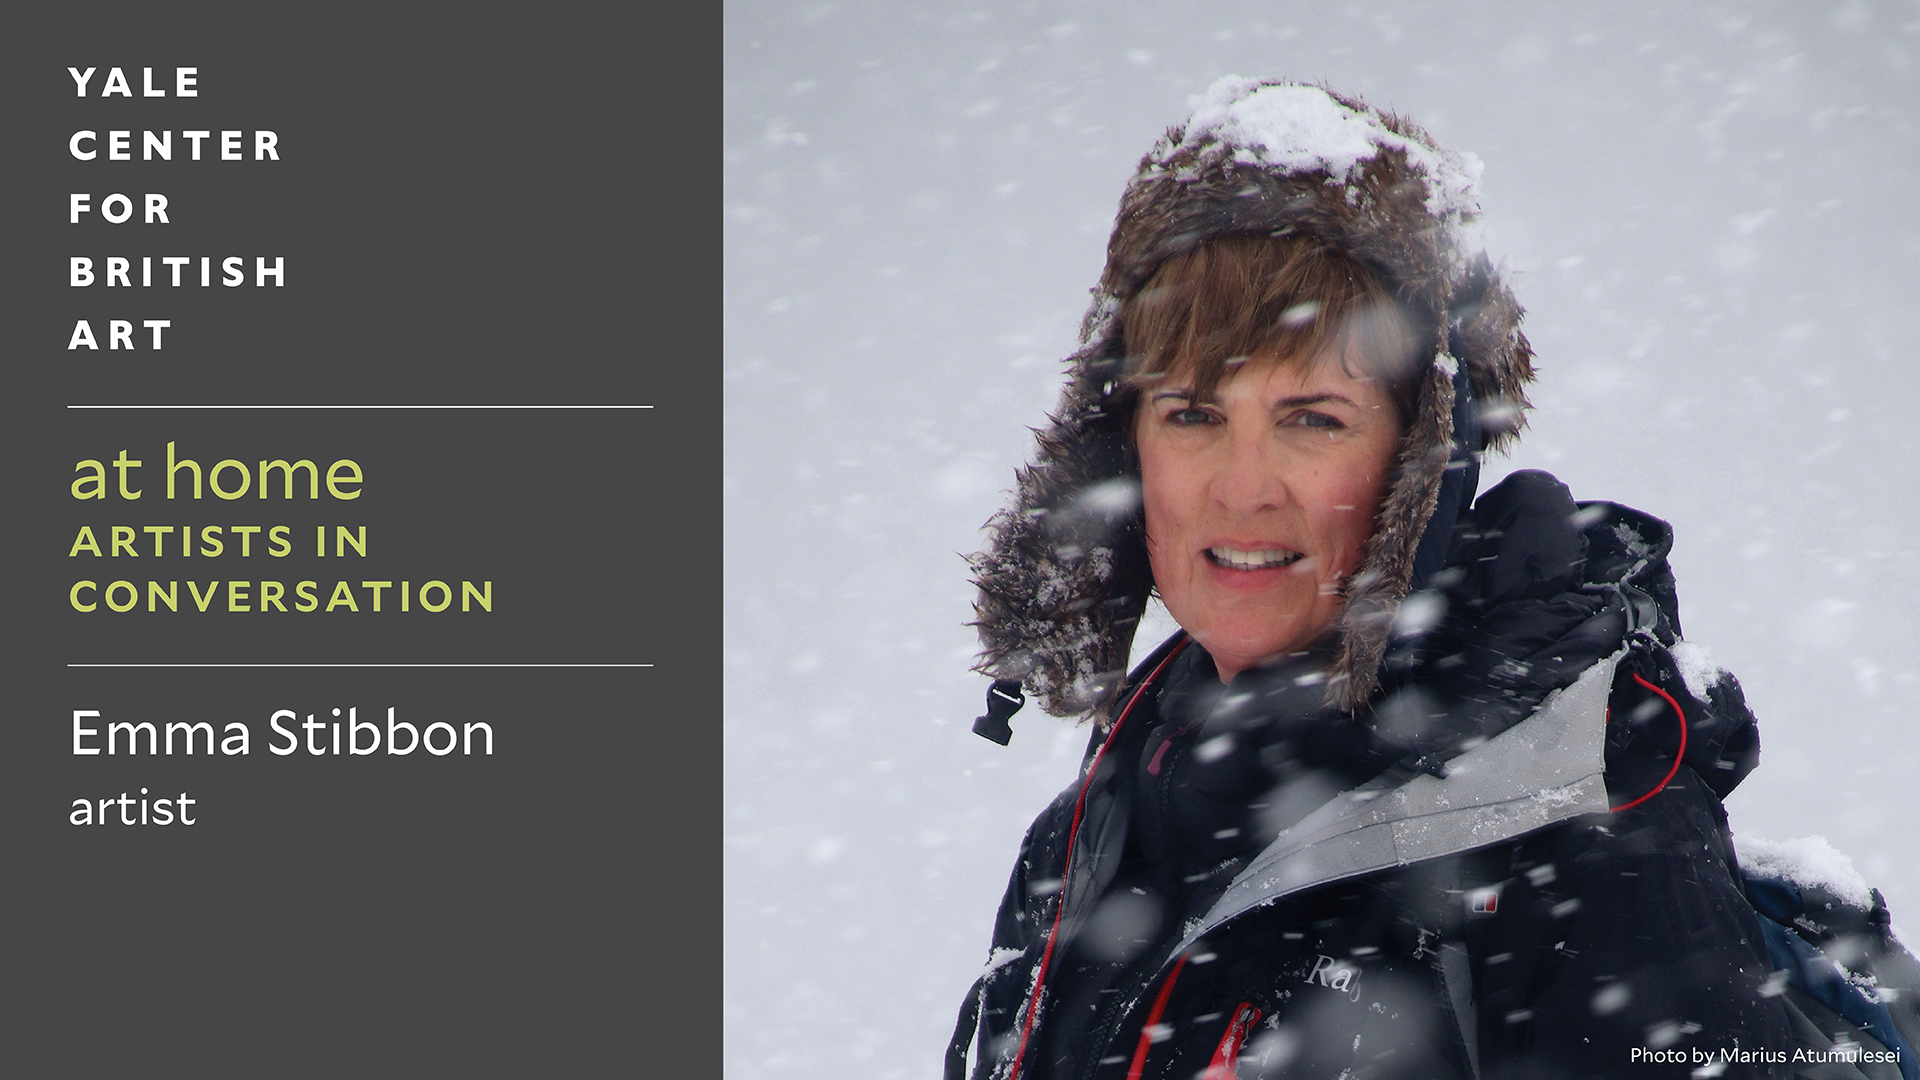 A title slide with a portrait of Emma Stibbon, a white woman in a snowy environment and warm winter attire